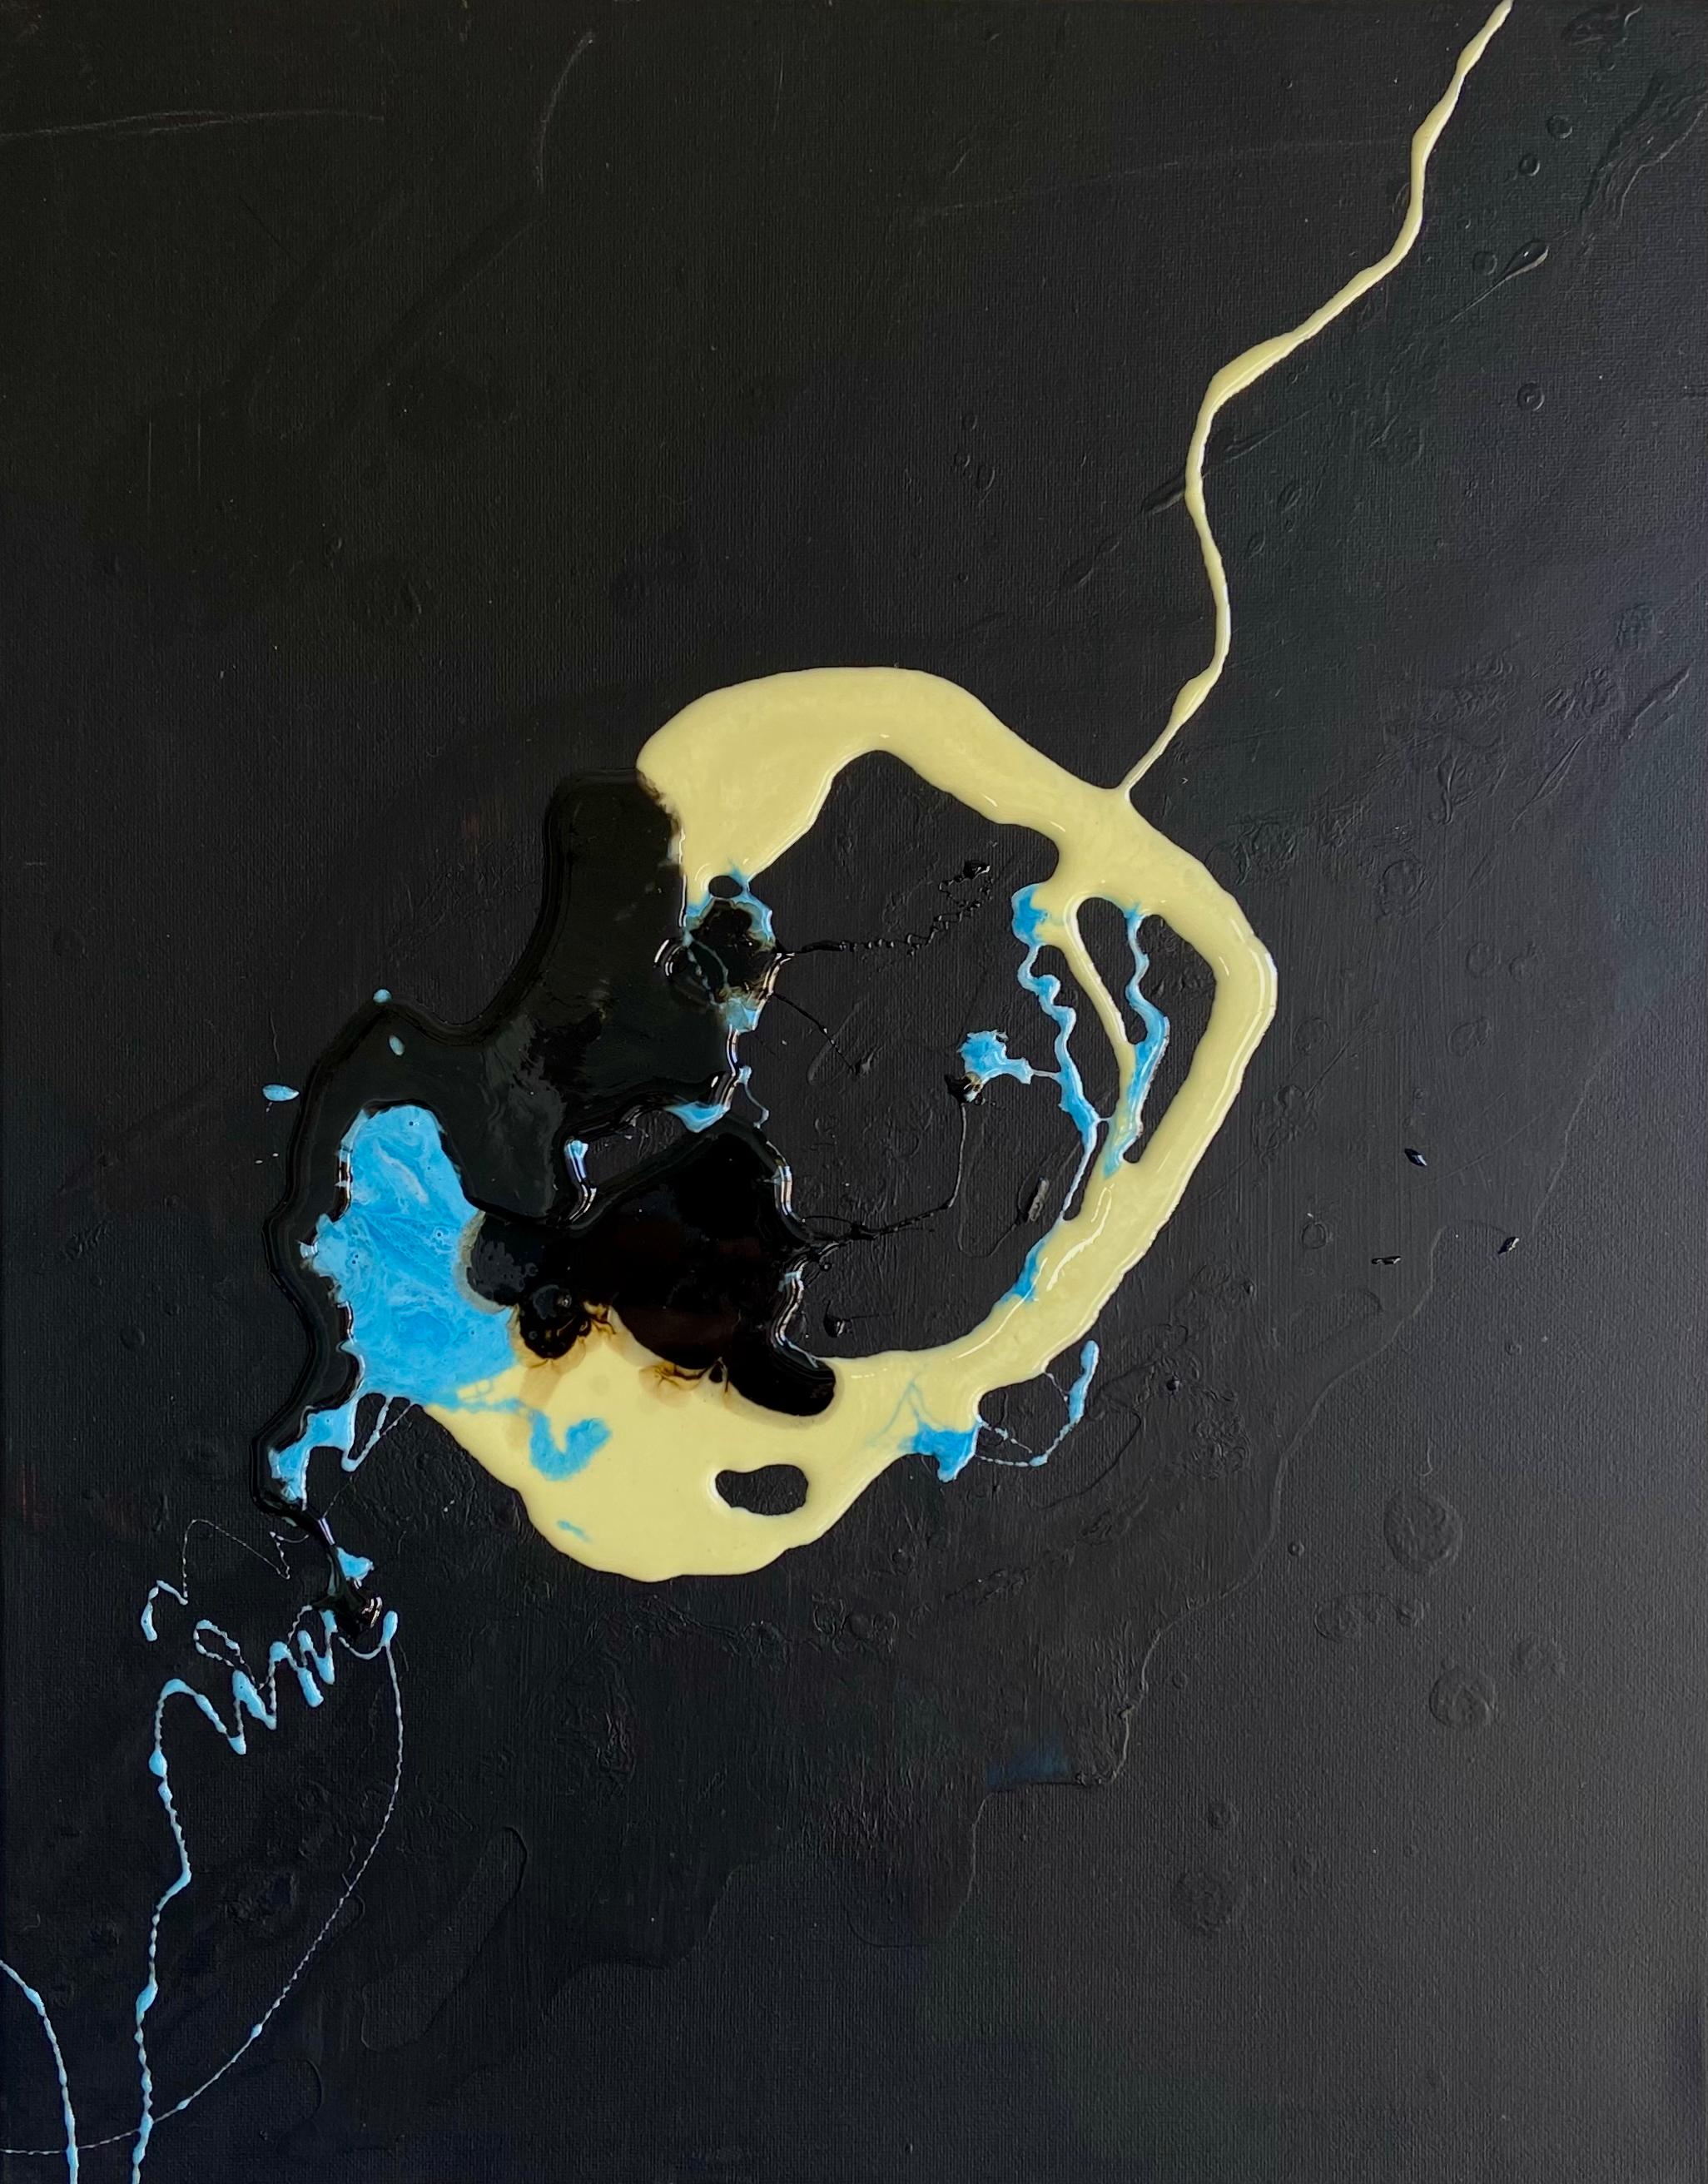 Liquid Face - abstraction art made in blue, yellow, black and white color